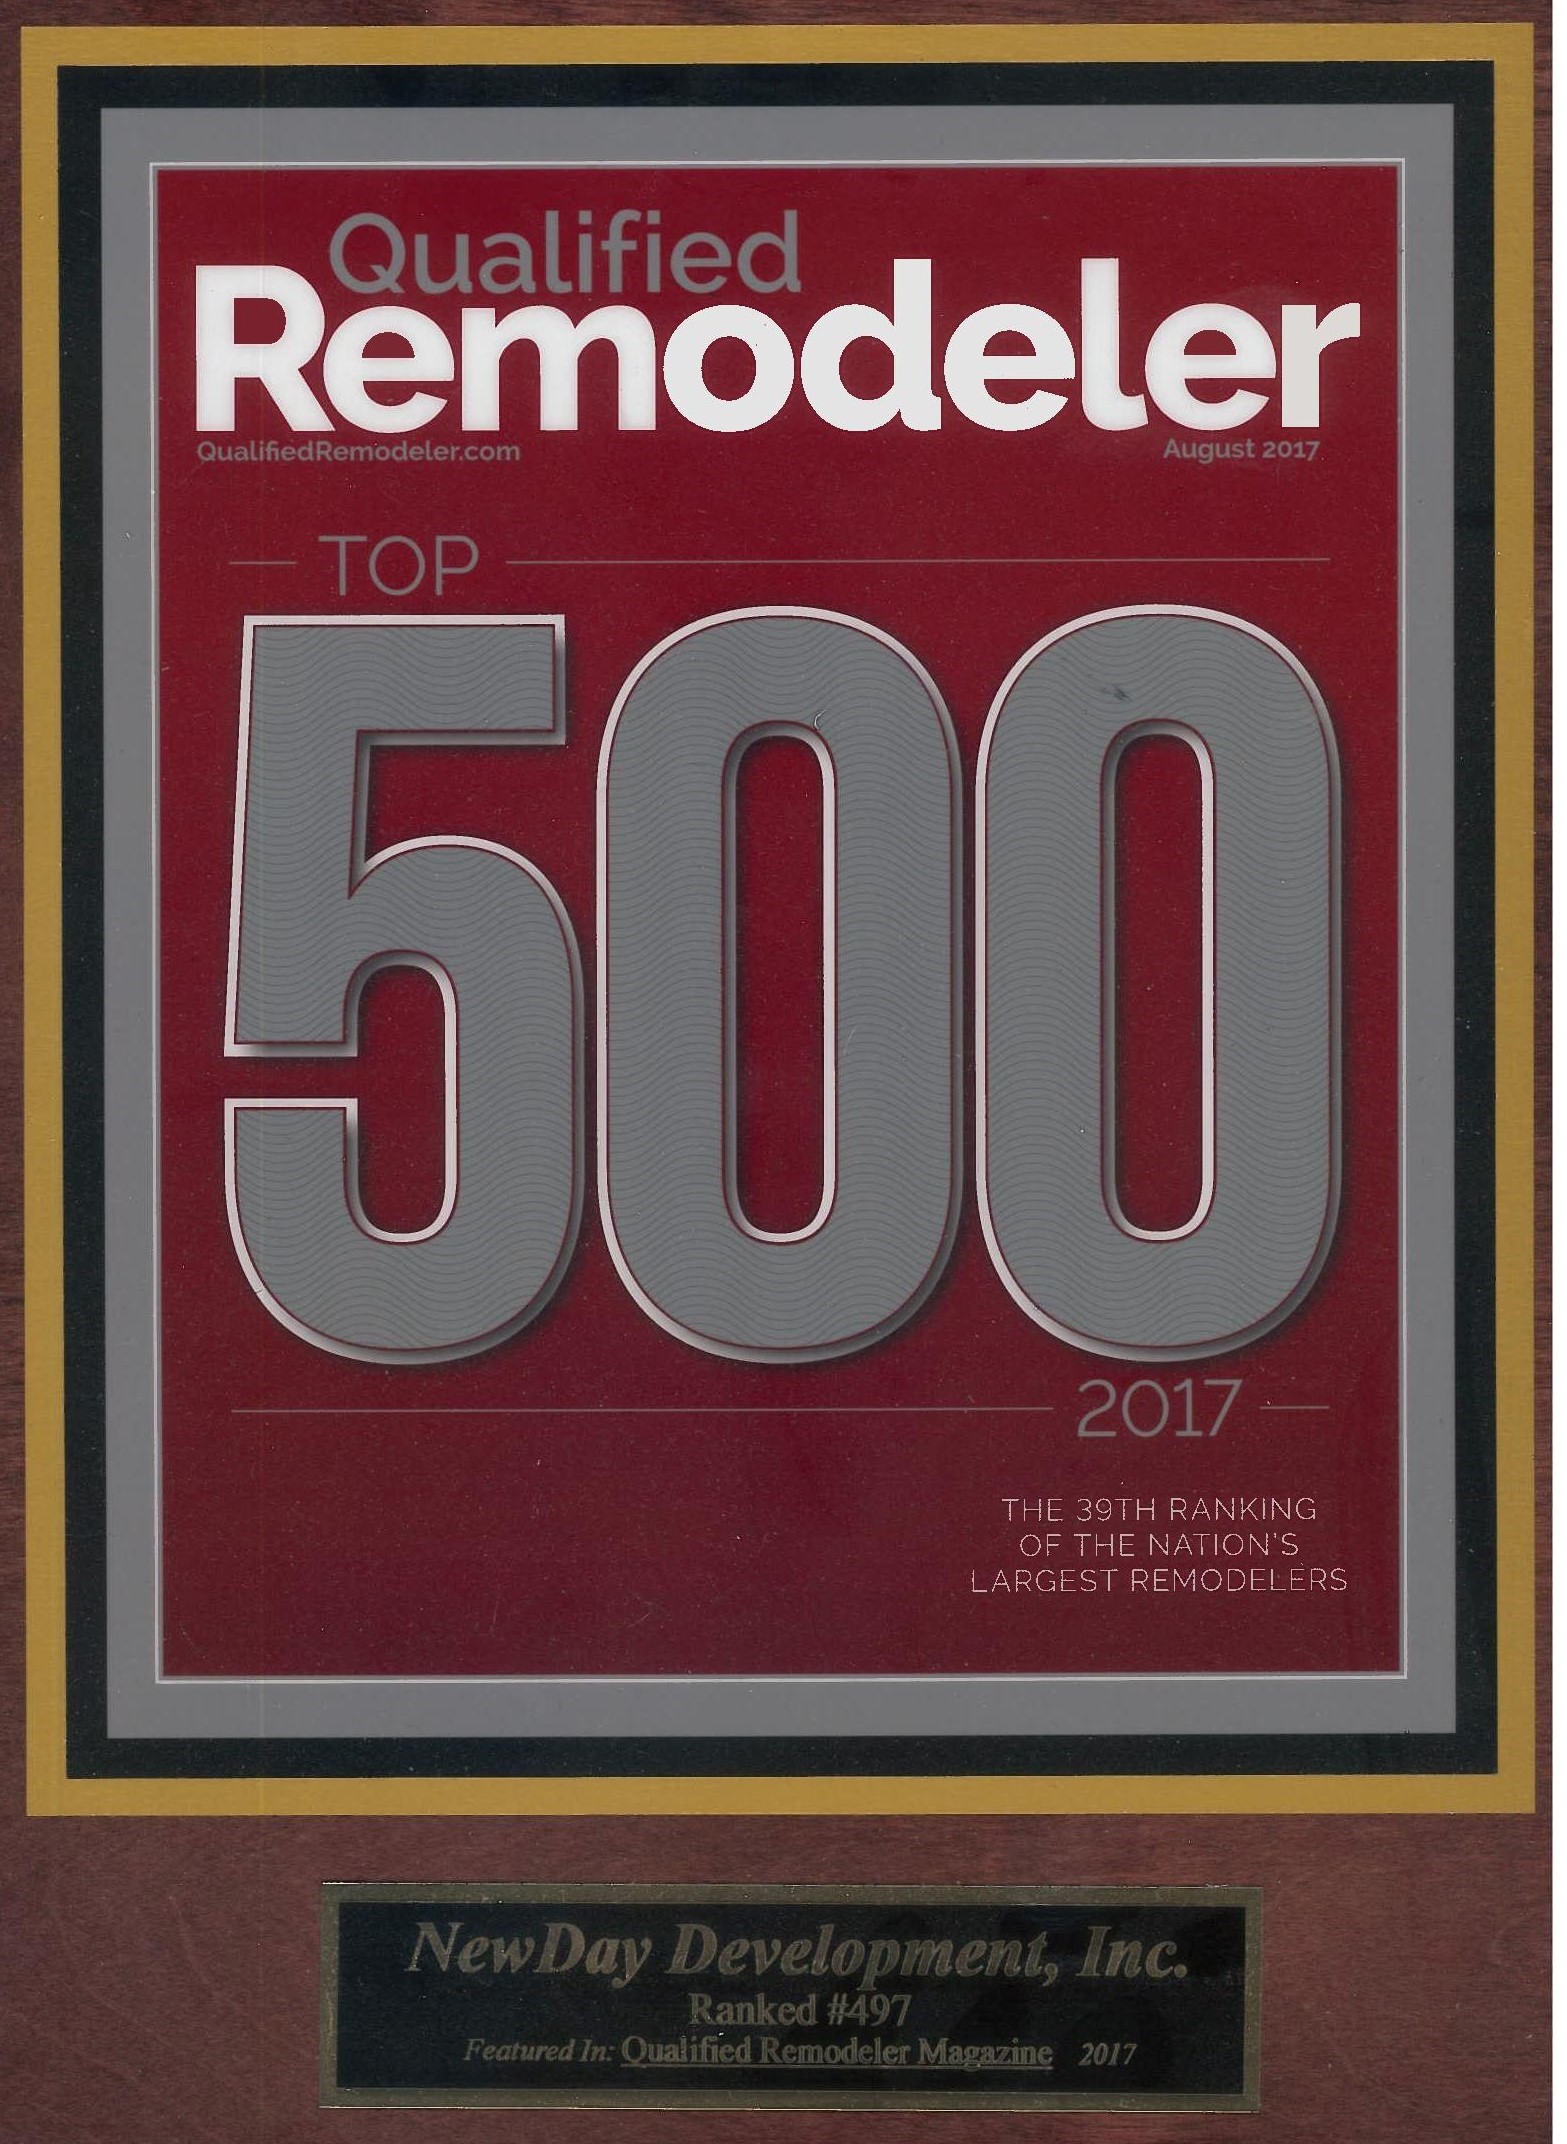 Qualified Remodeler Top 500 firms –